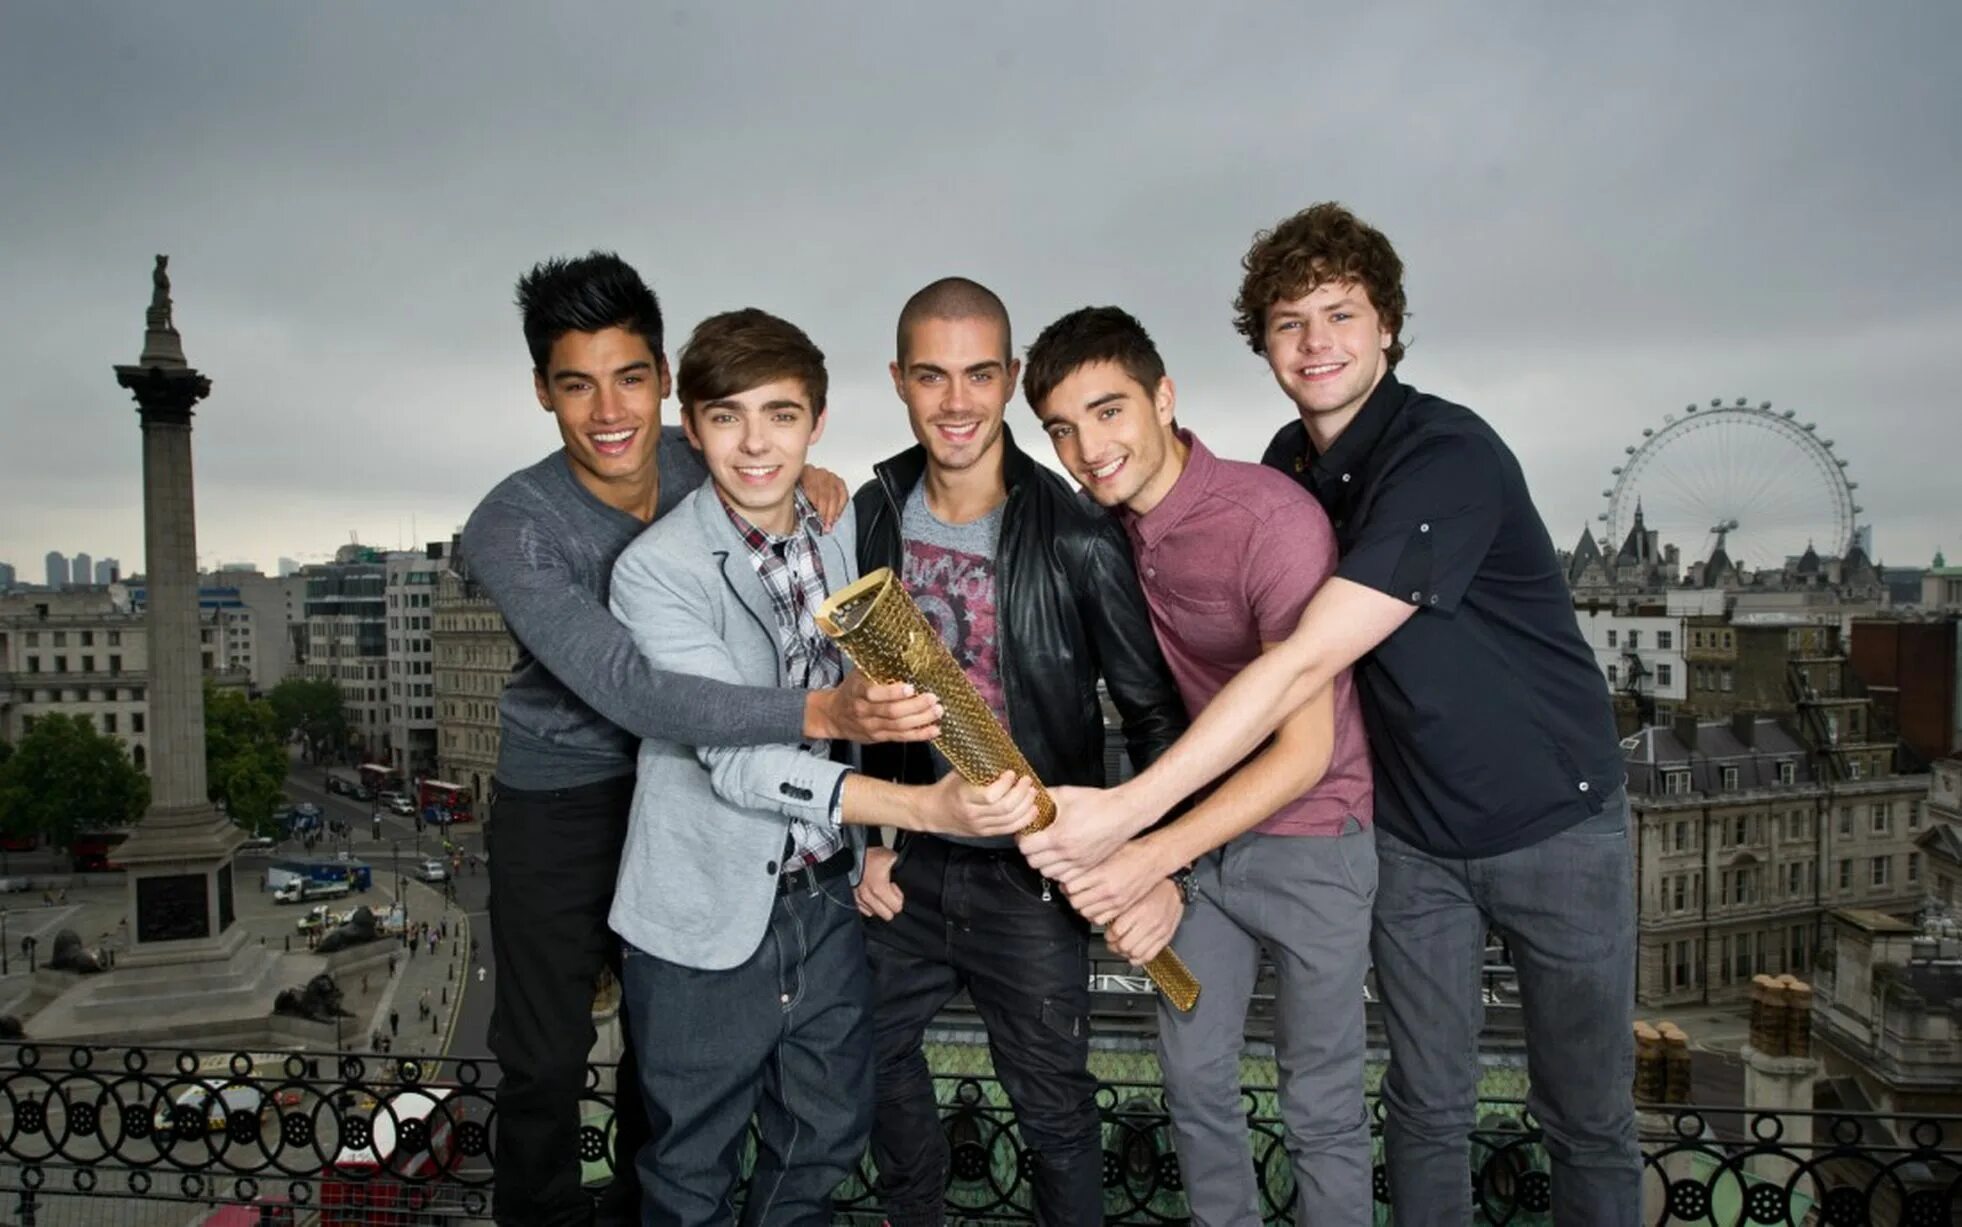 Want. The wanted Tom. The bangls Band gettyimages.